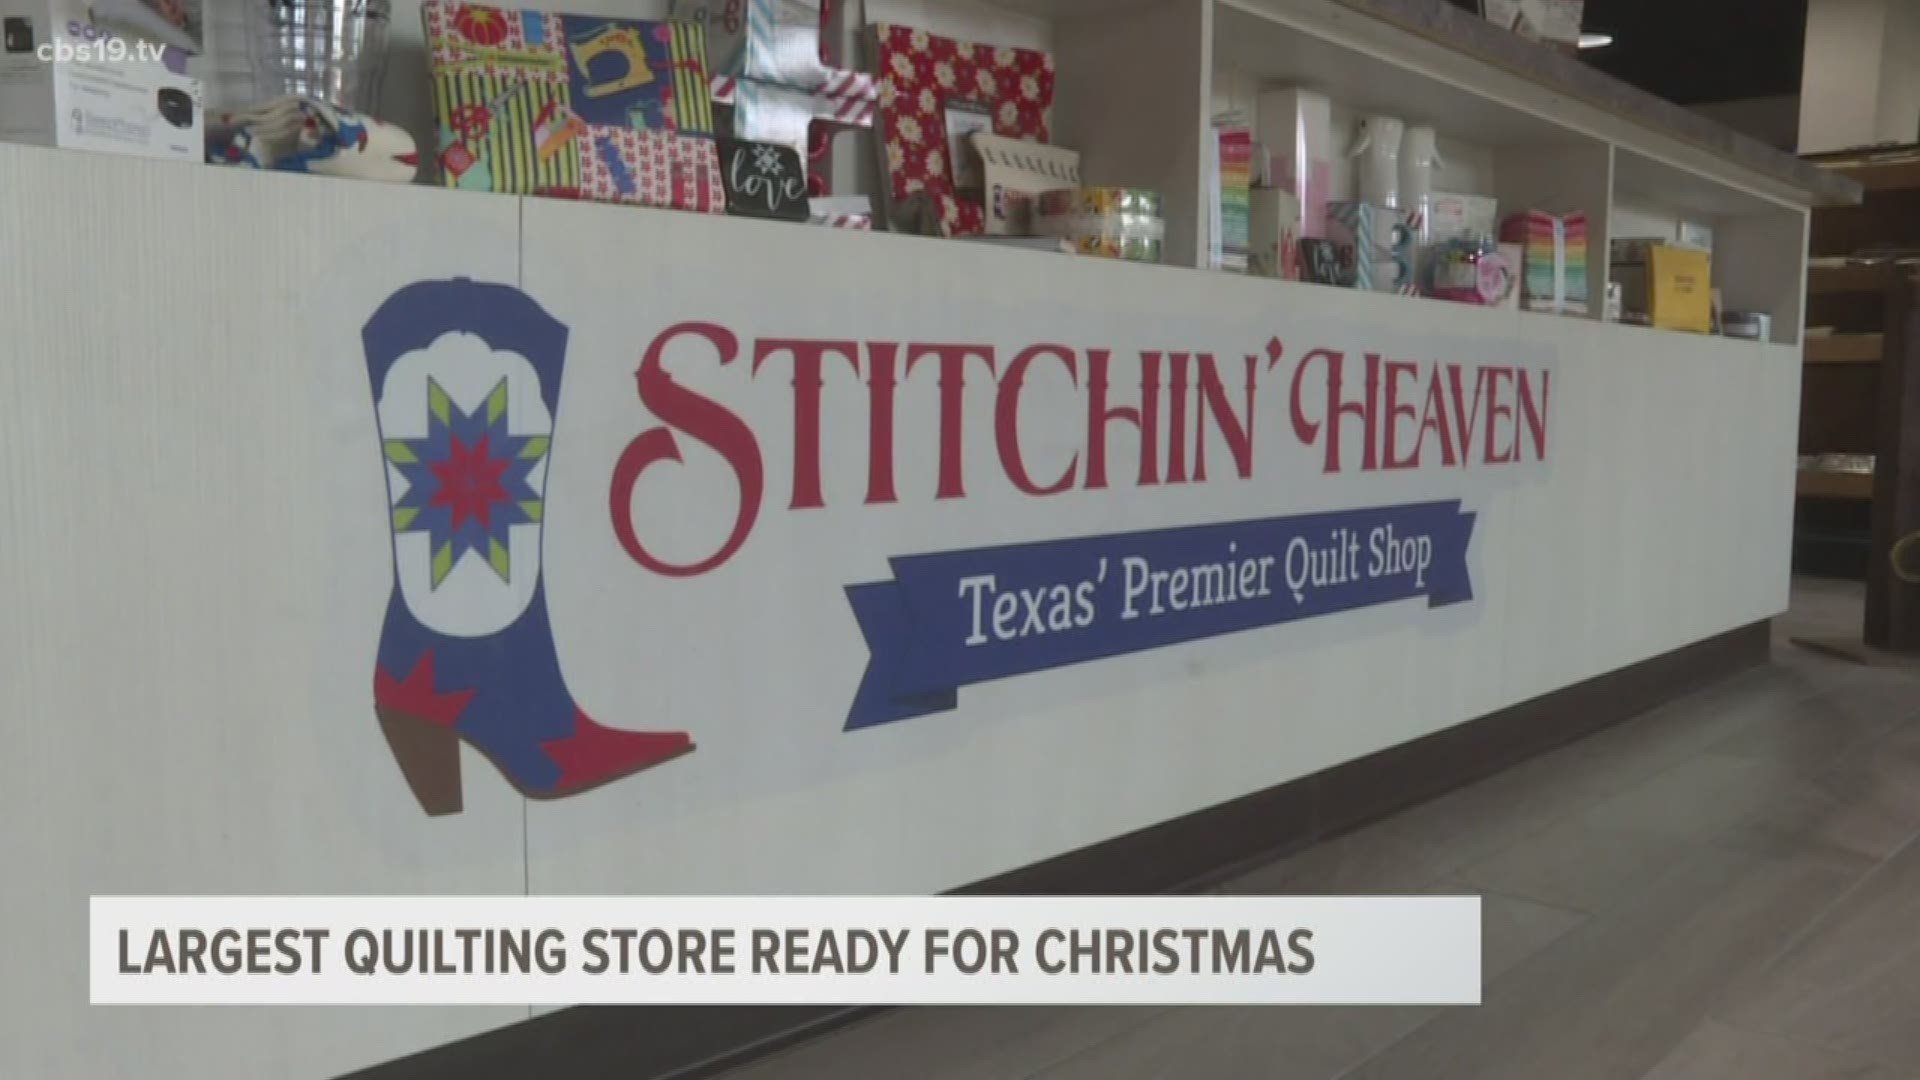 Stitchin' Heavan recently moved back to Quitman in a new location that's 17,500 square feet, making it the largest quilting store in Texas.